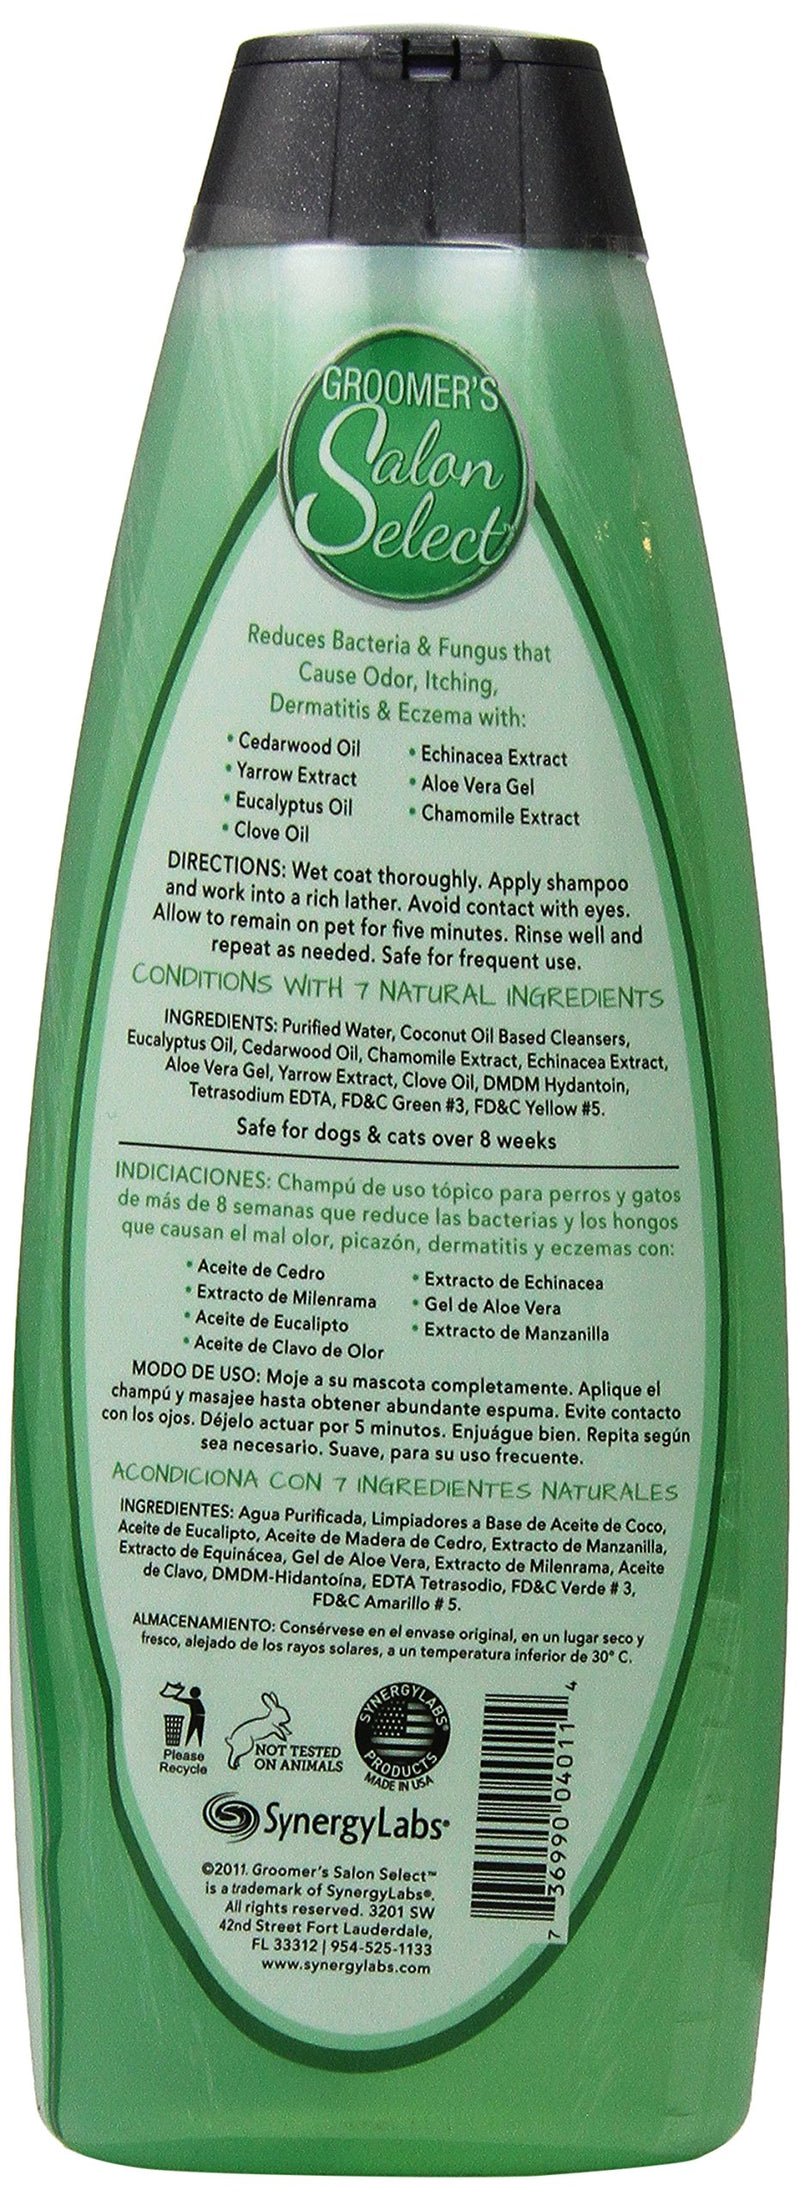 [Australia] - Groomer's Salon Select, Herbal Shampoo, 18.4 fl. oz – Odor and Itch Relief, Conditions with Natural Ingredients, Safe for Dogs and Cats 